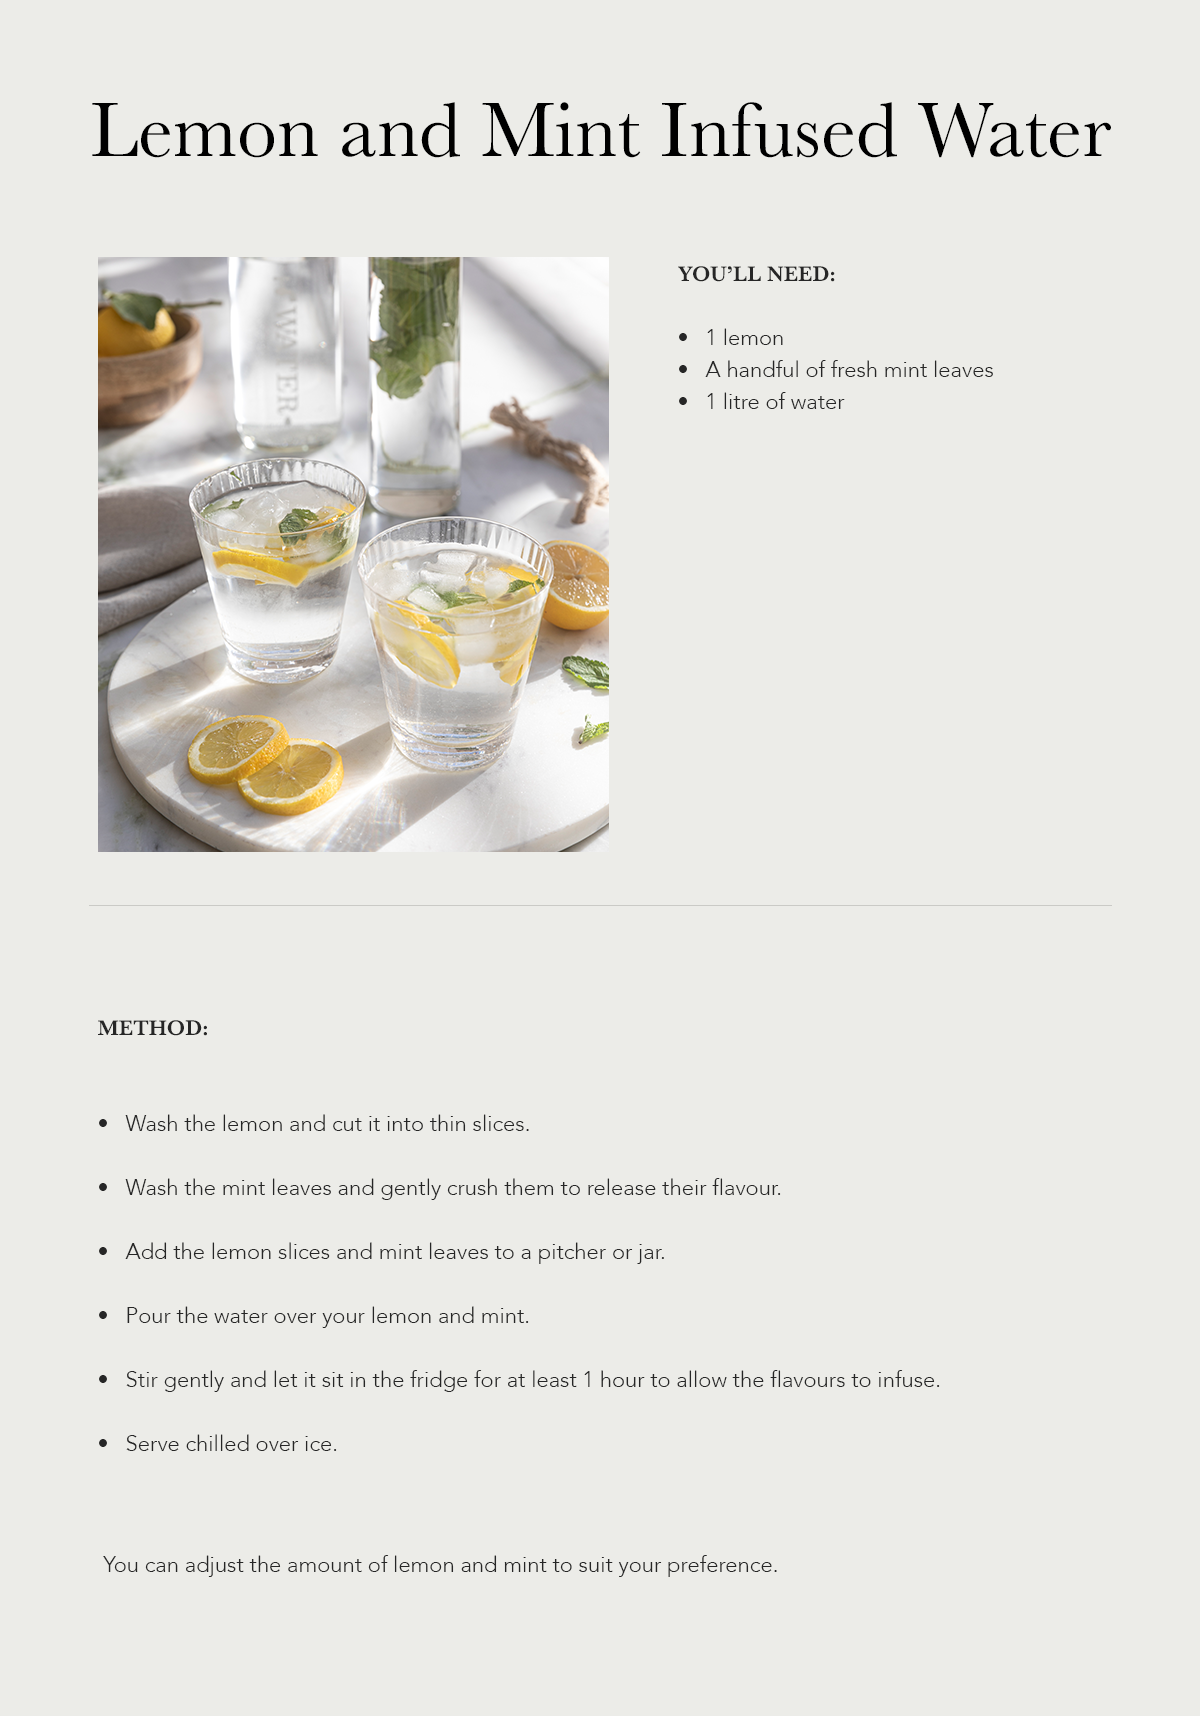 Lemon and Mint Infused Water Recipe